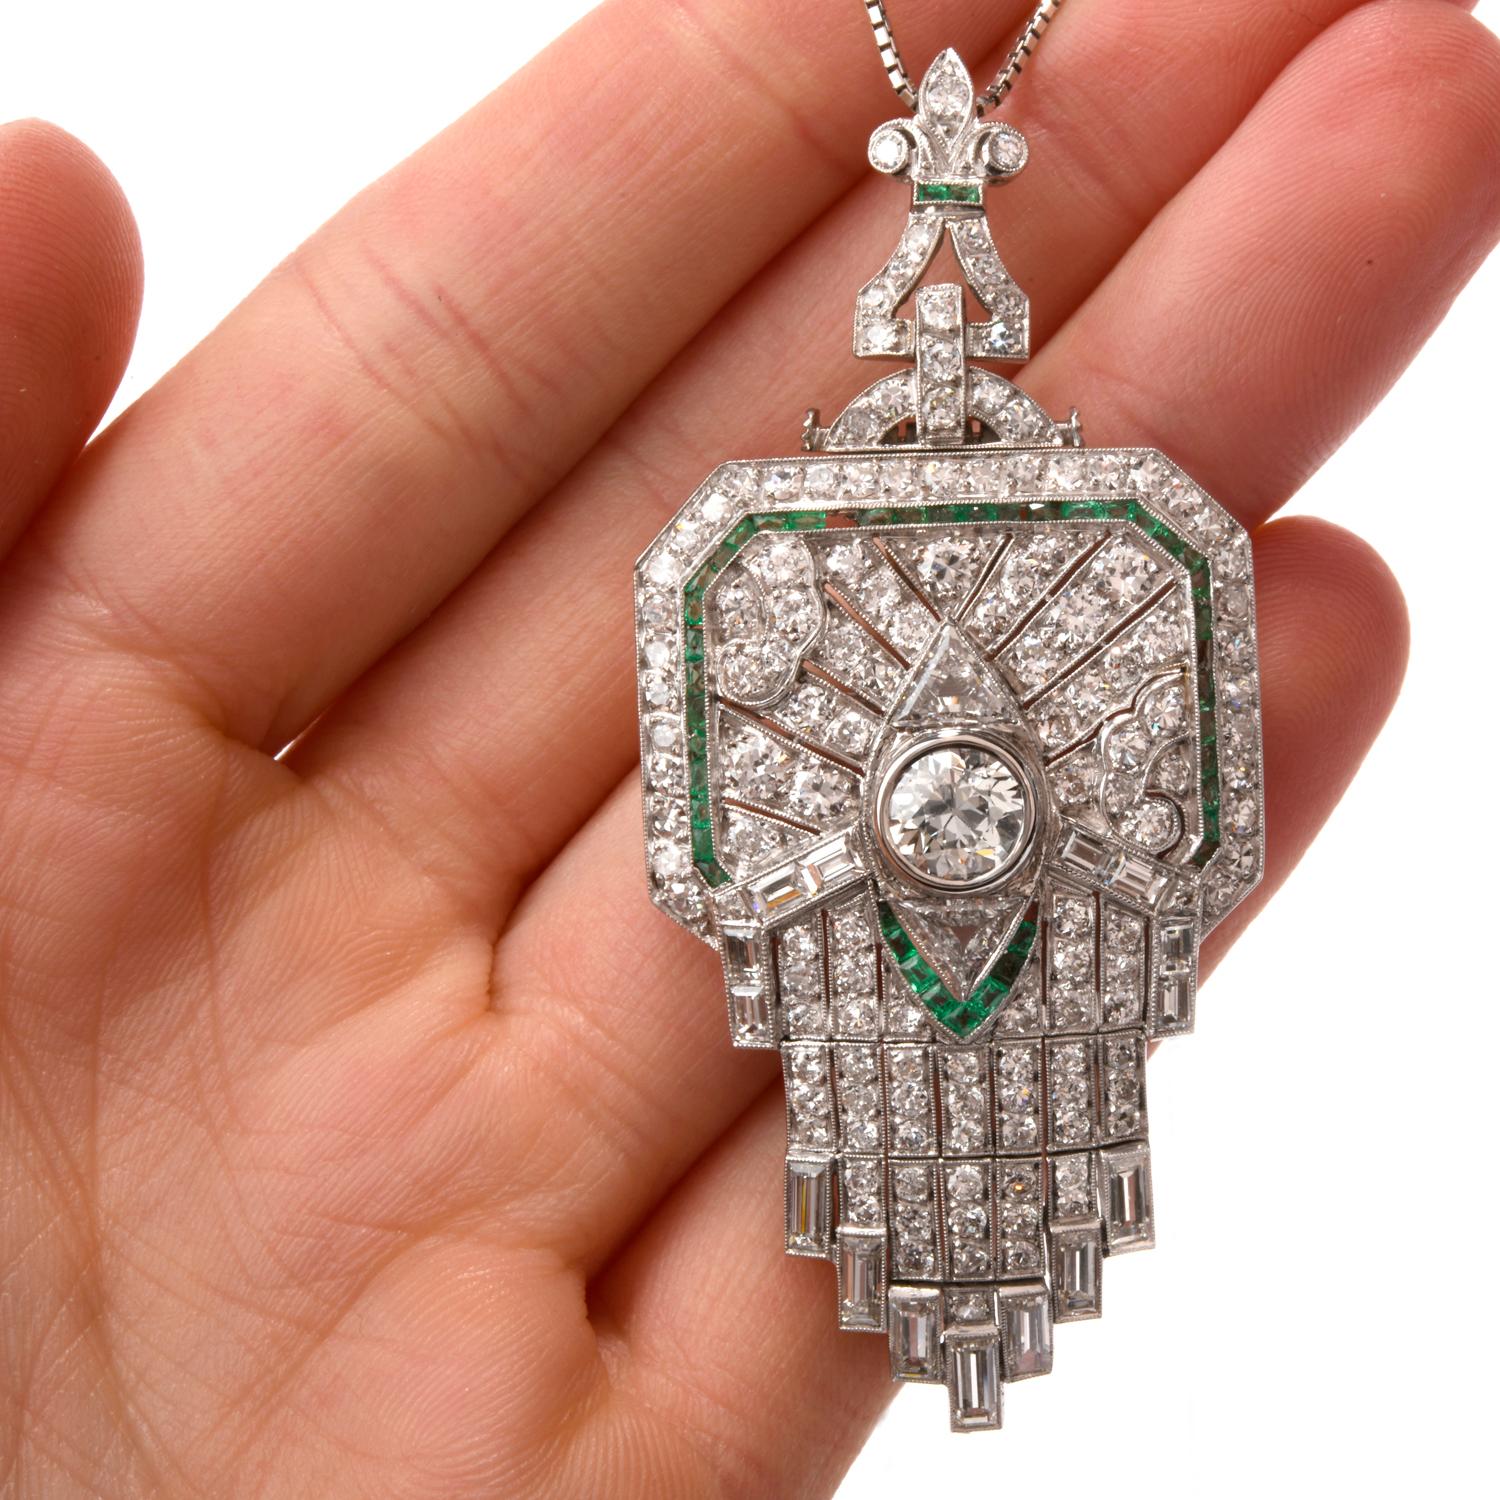 This Diamond and Emerald Brooch/Pendant was inspired in an Art Deco design featuring a Fleur De Lis atop and was crafted in Luxurious Platinum.   This stately piece is able to be worn as a brooch or pendant.

Featured in the center is one European